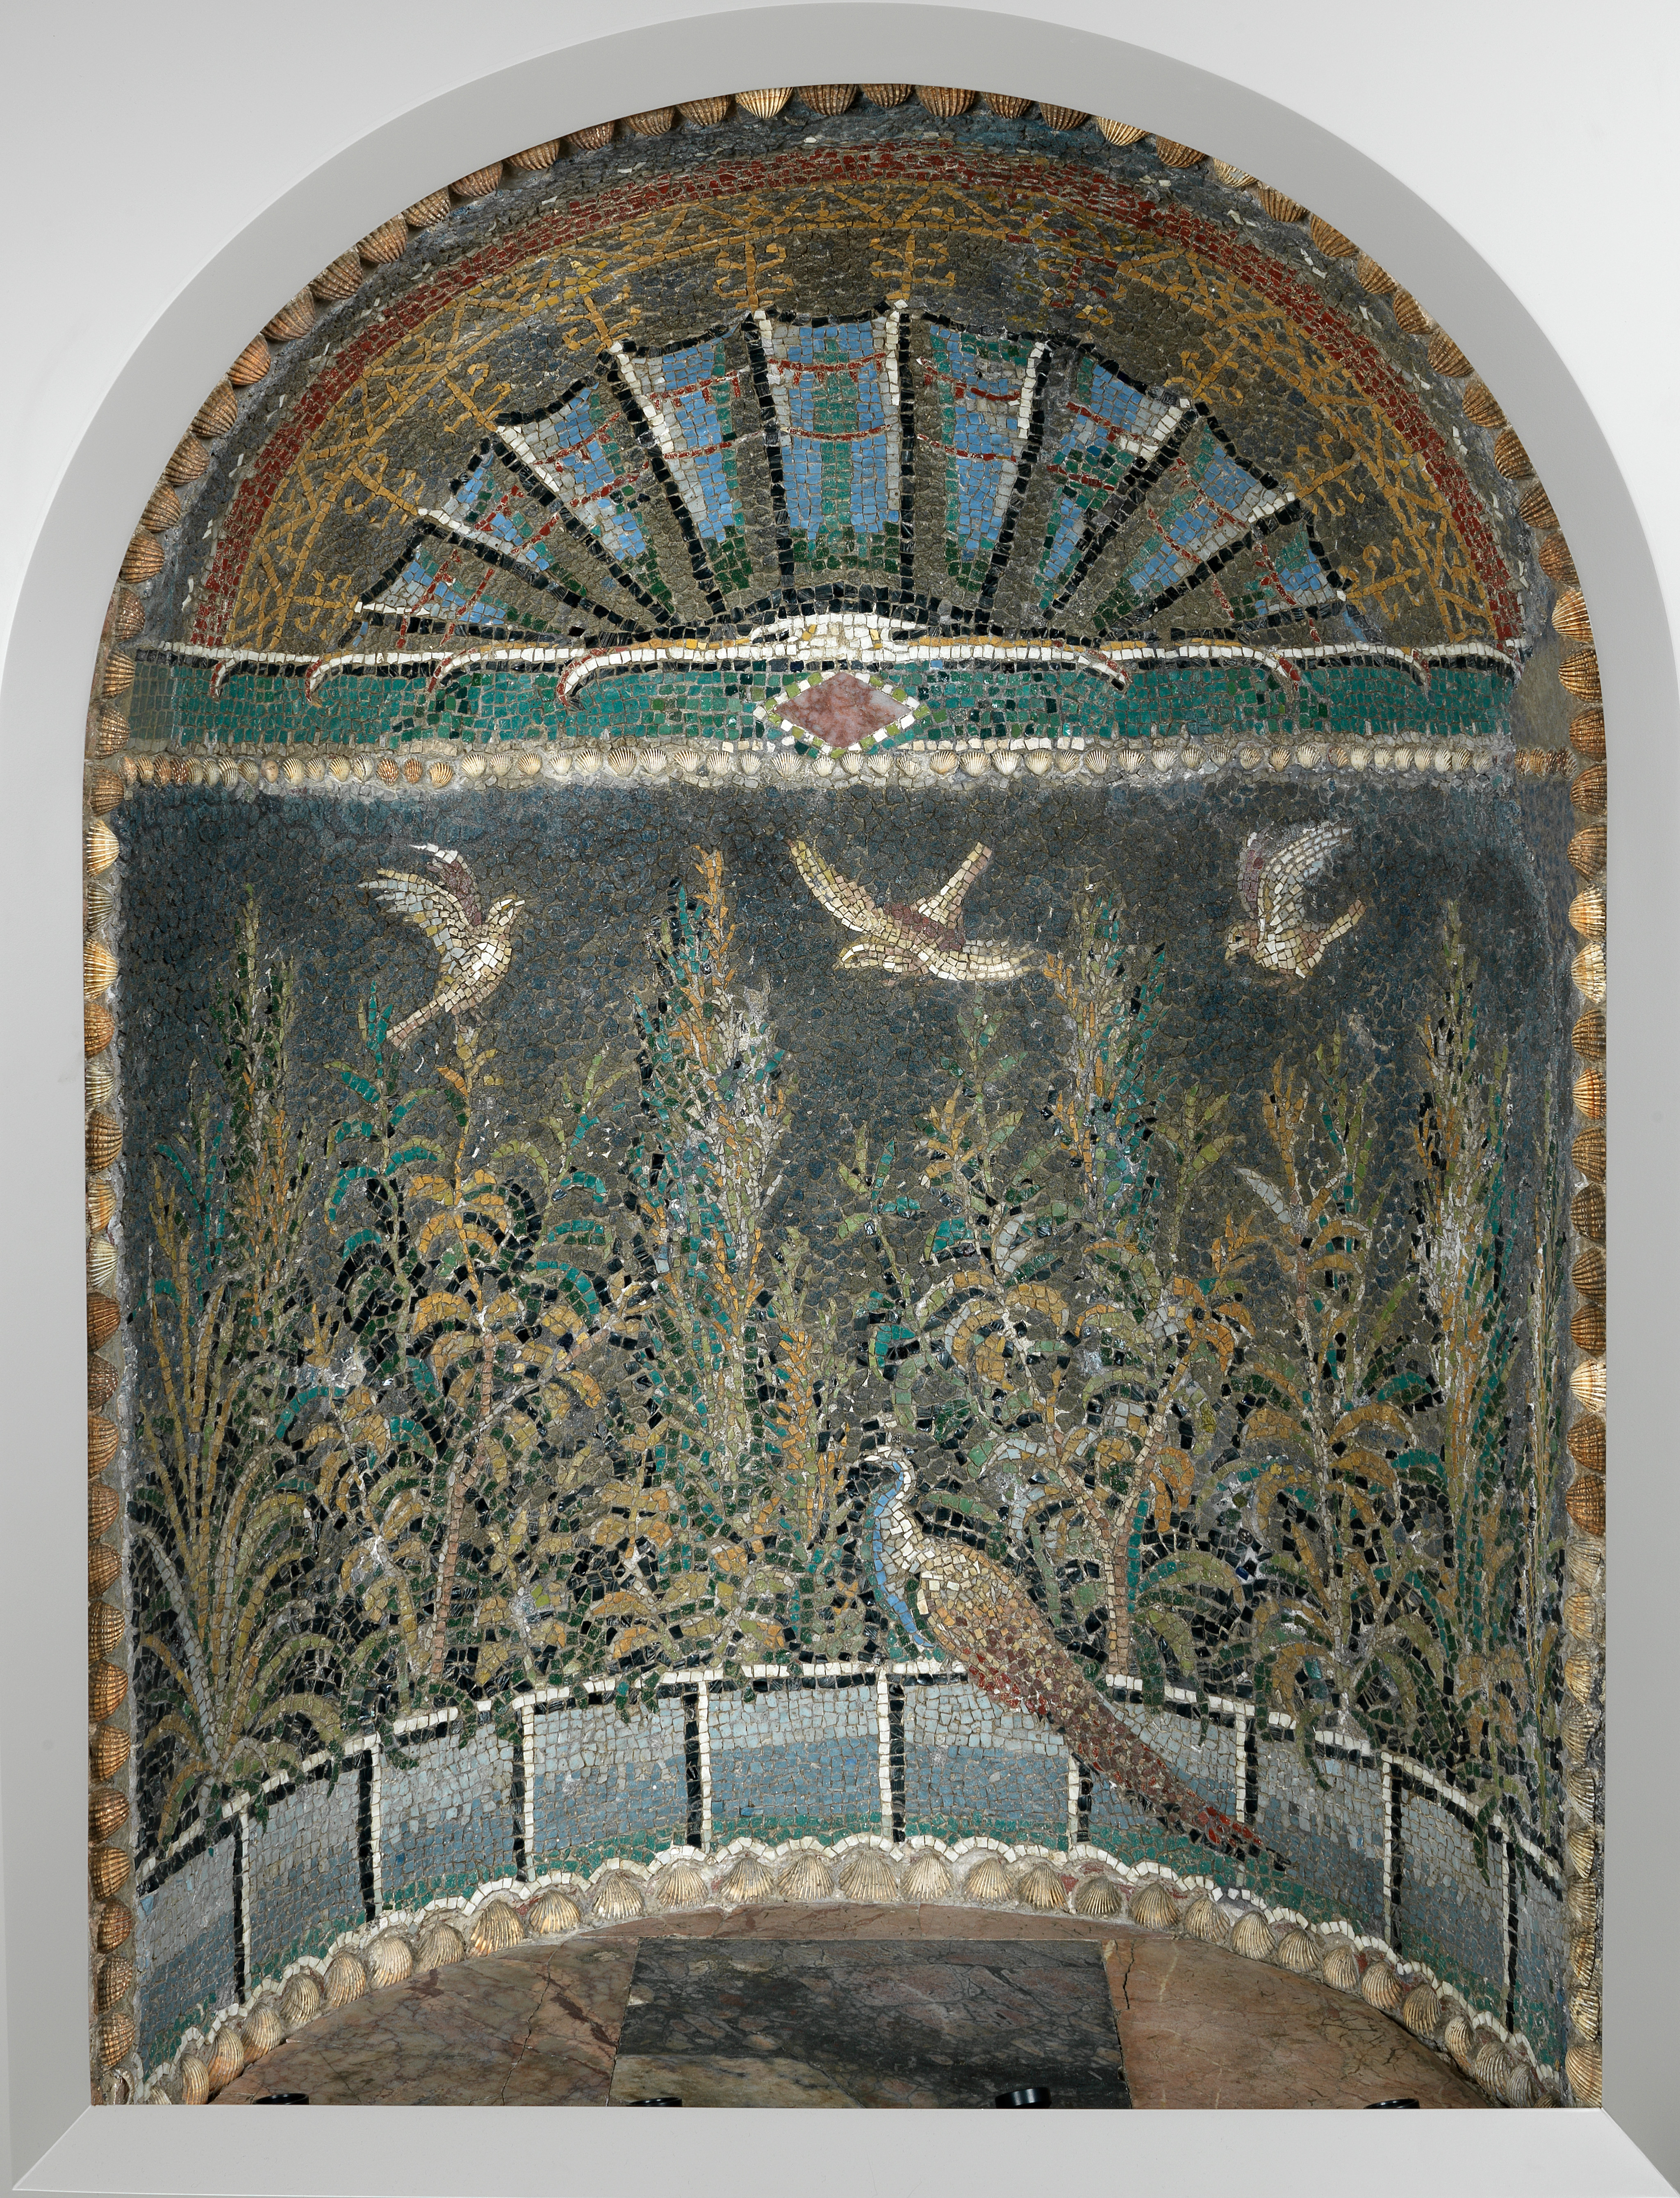 Photograph of a niche with an ancient Roman mosaic in it. The mosaic shows plants, three birds flying at the top and a peacock perched on the edge at the bottom.